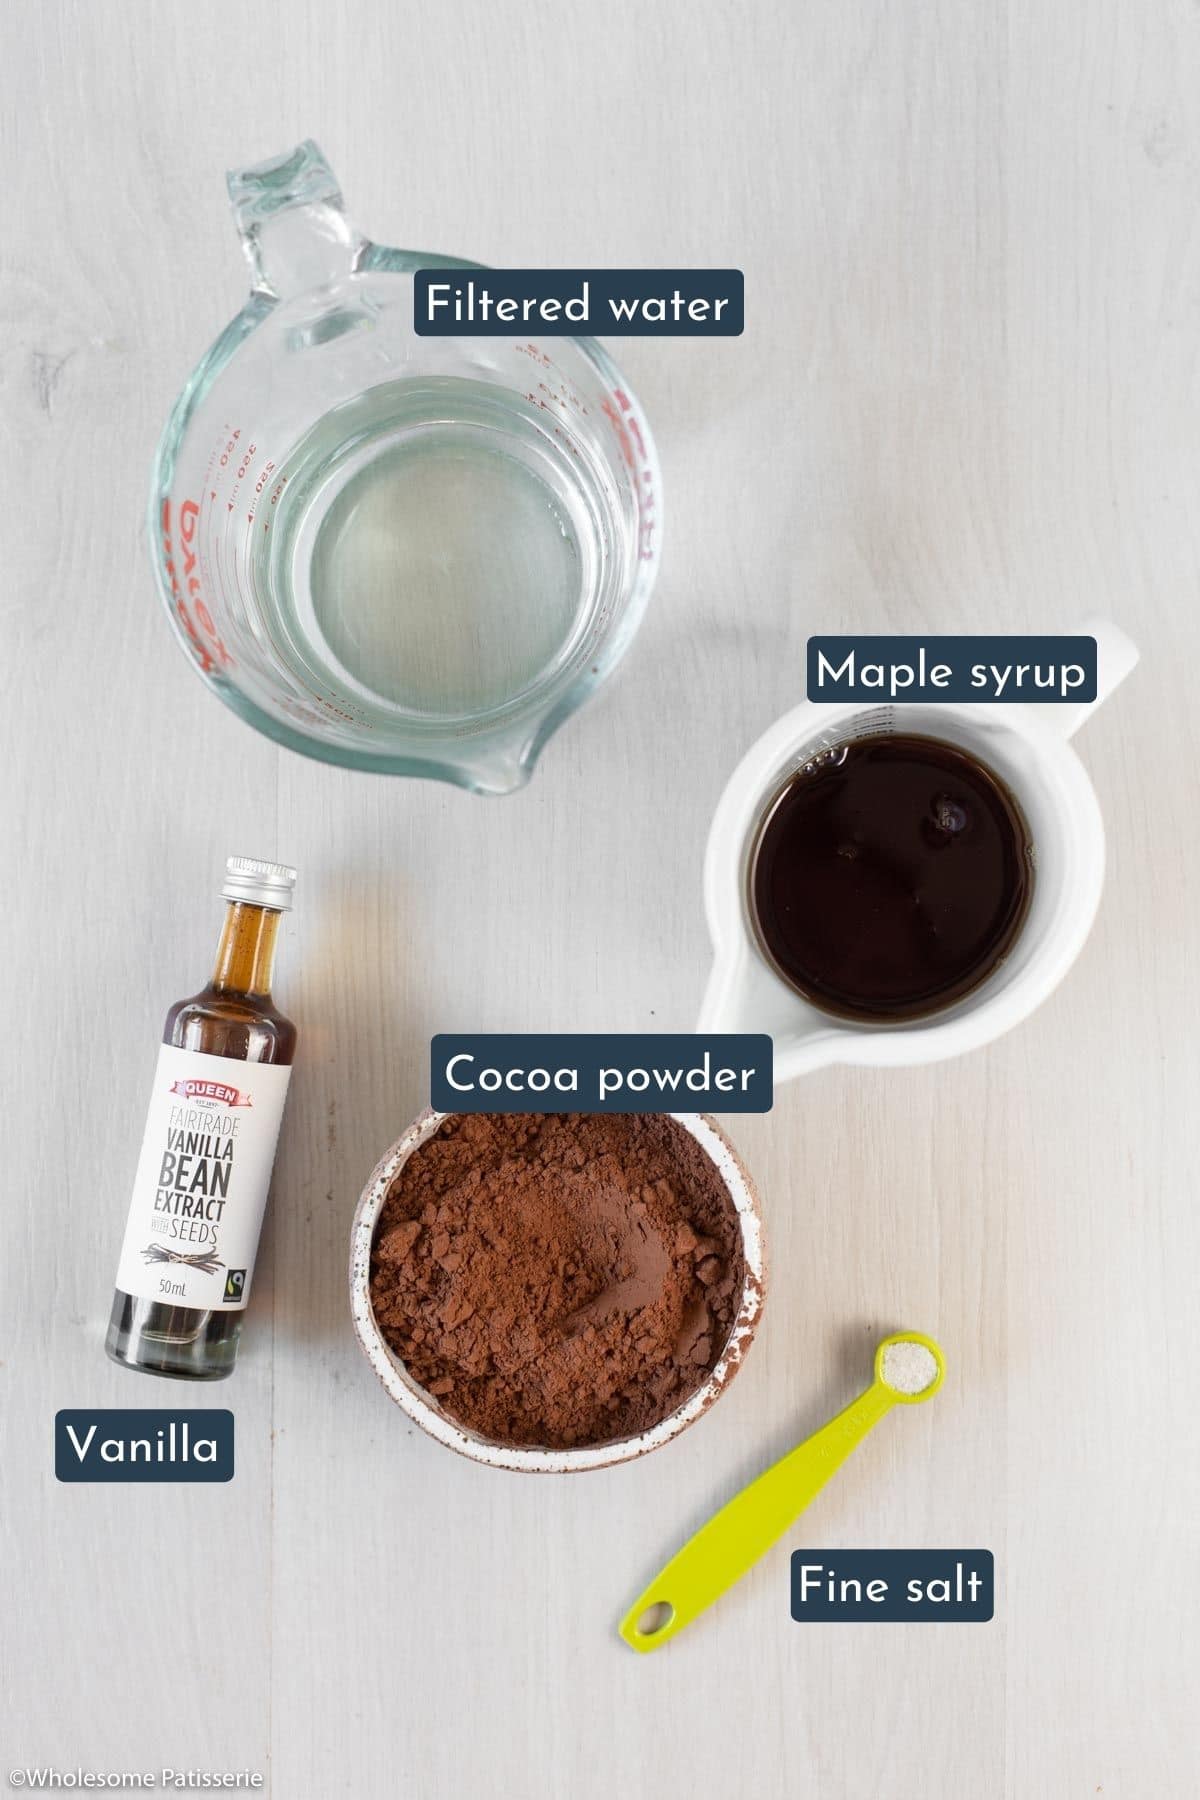 The individual ingredients needed to make this chocolate sauce